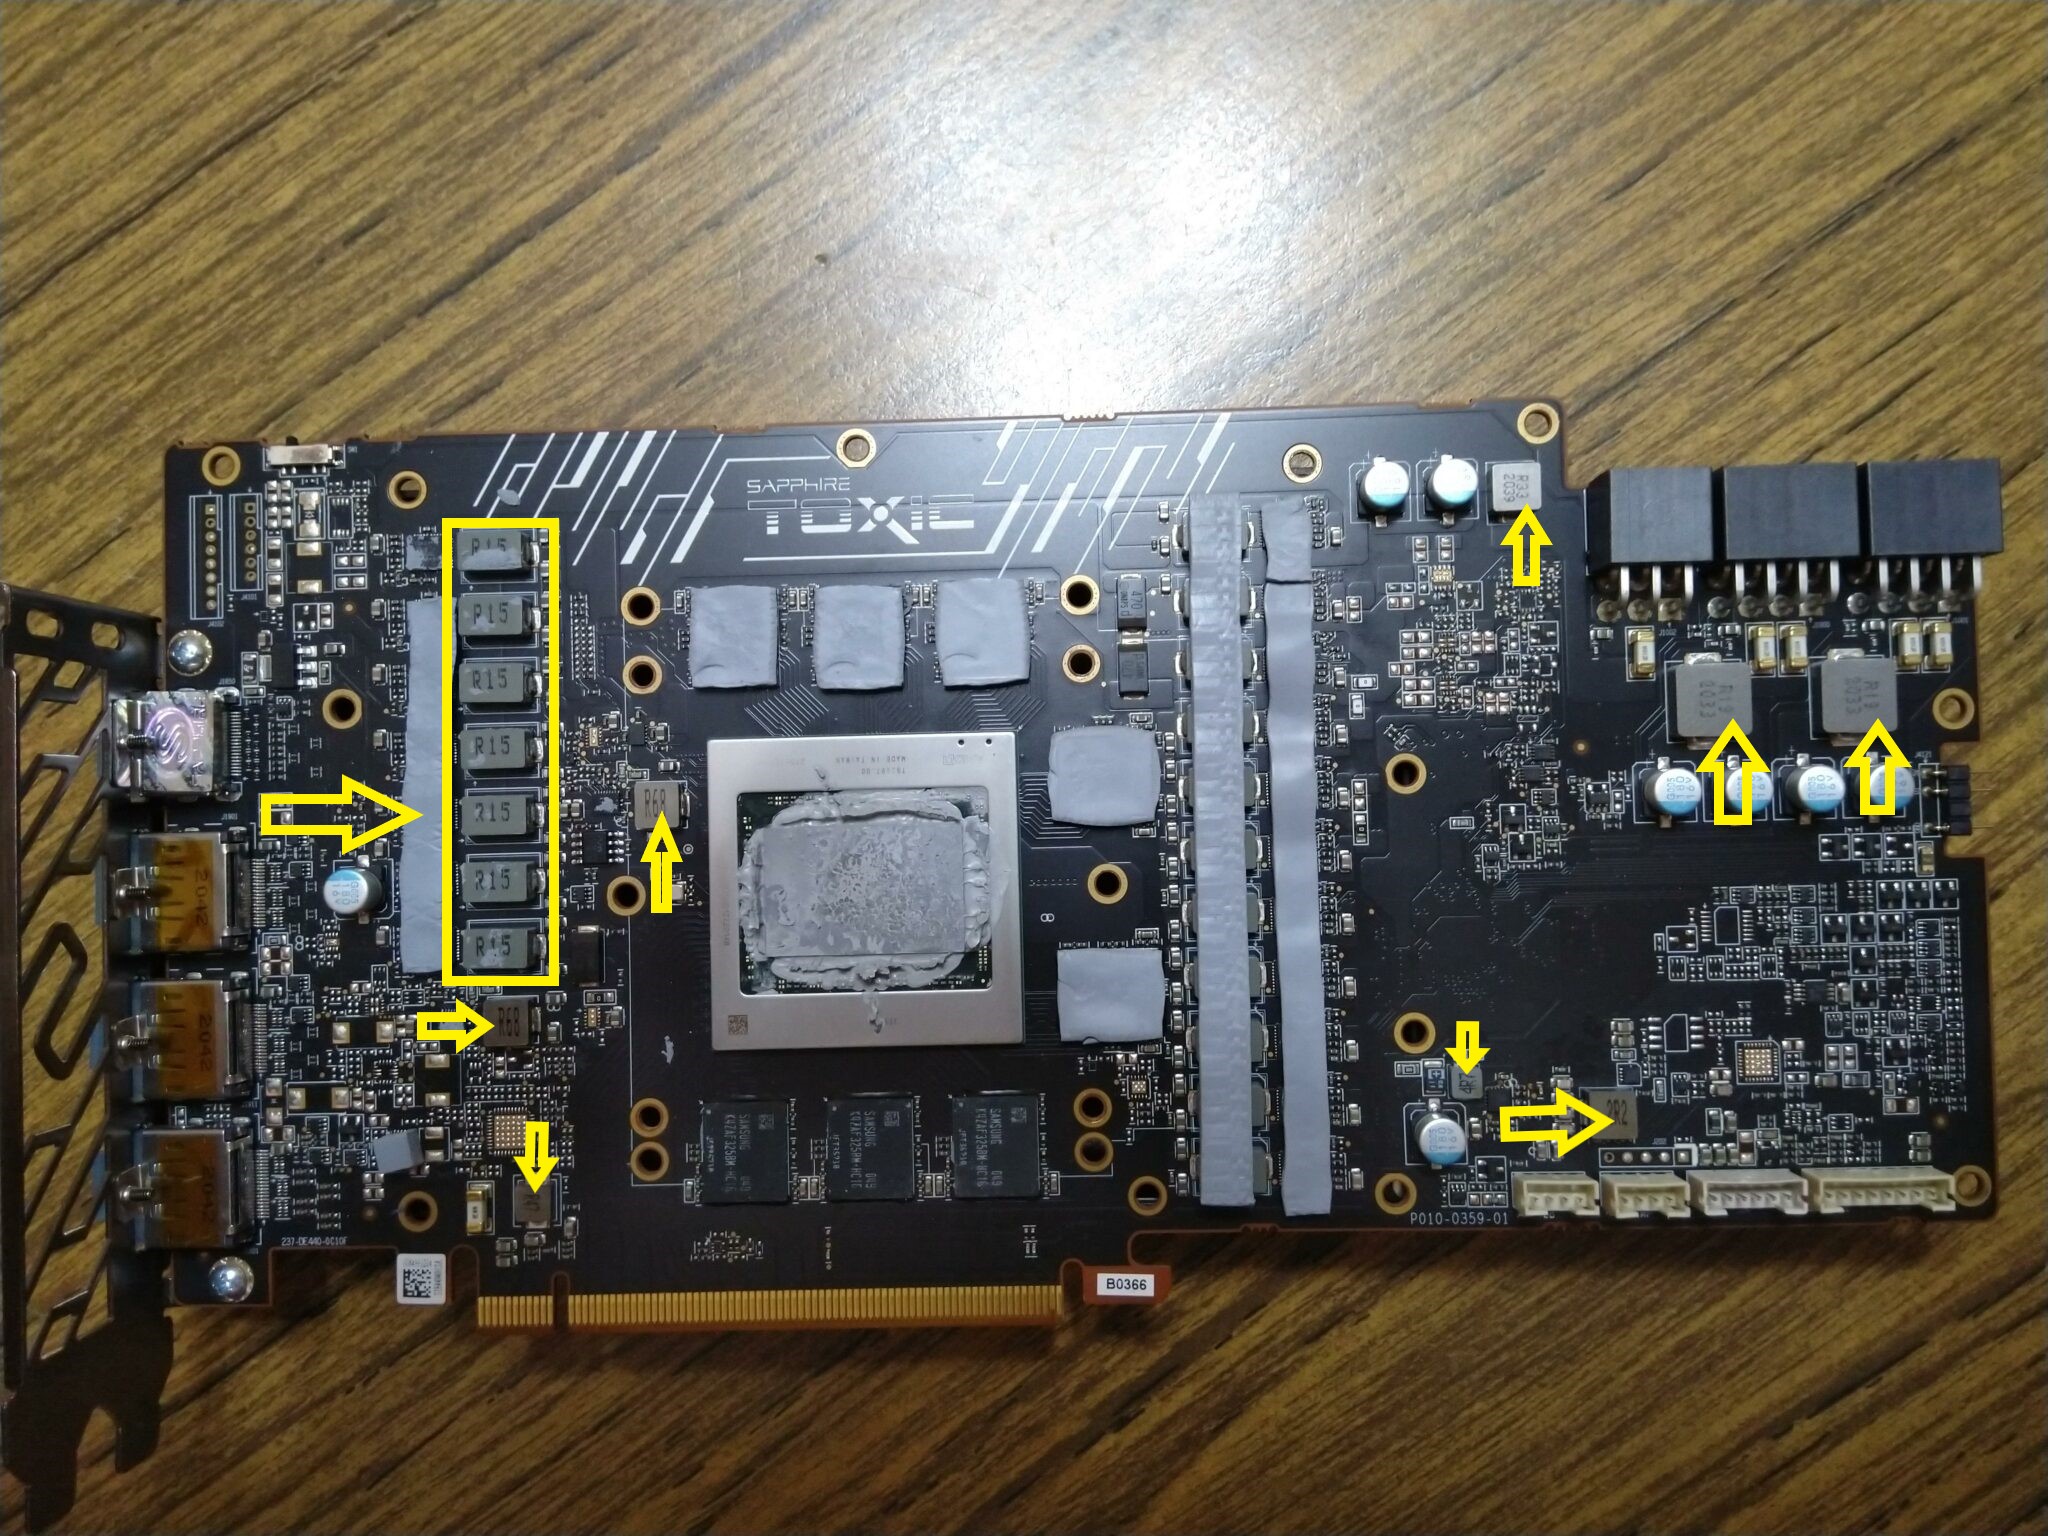 Sapphire-Radeon-RX-6900-XT-NITRO-Special-Edition-Graphics-Card-With-Toxic-Extreme-PCB-_2-2048x...jpg